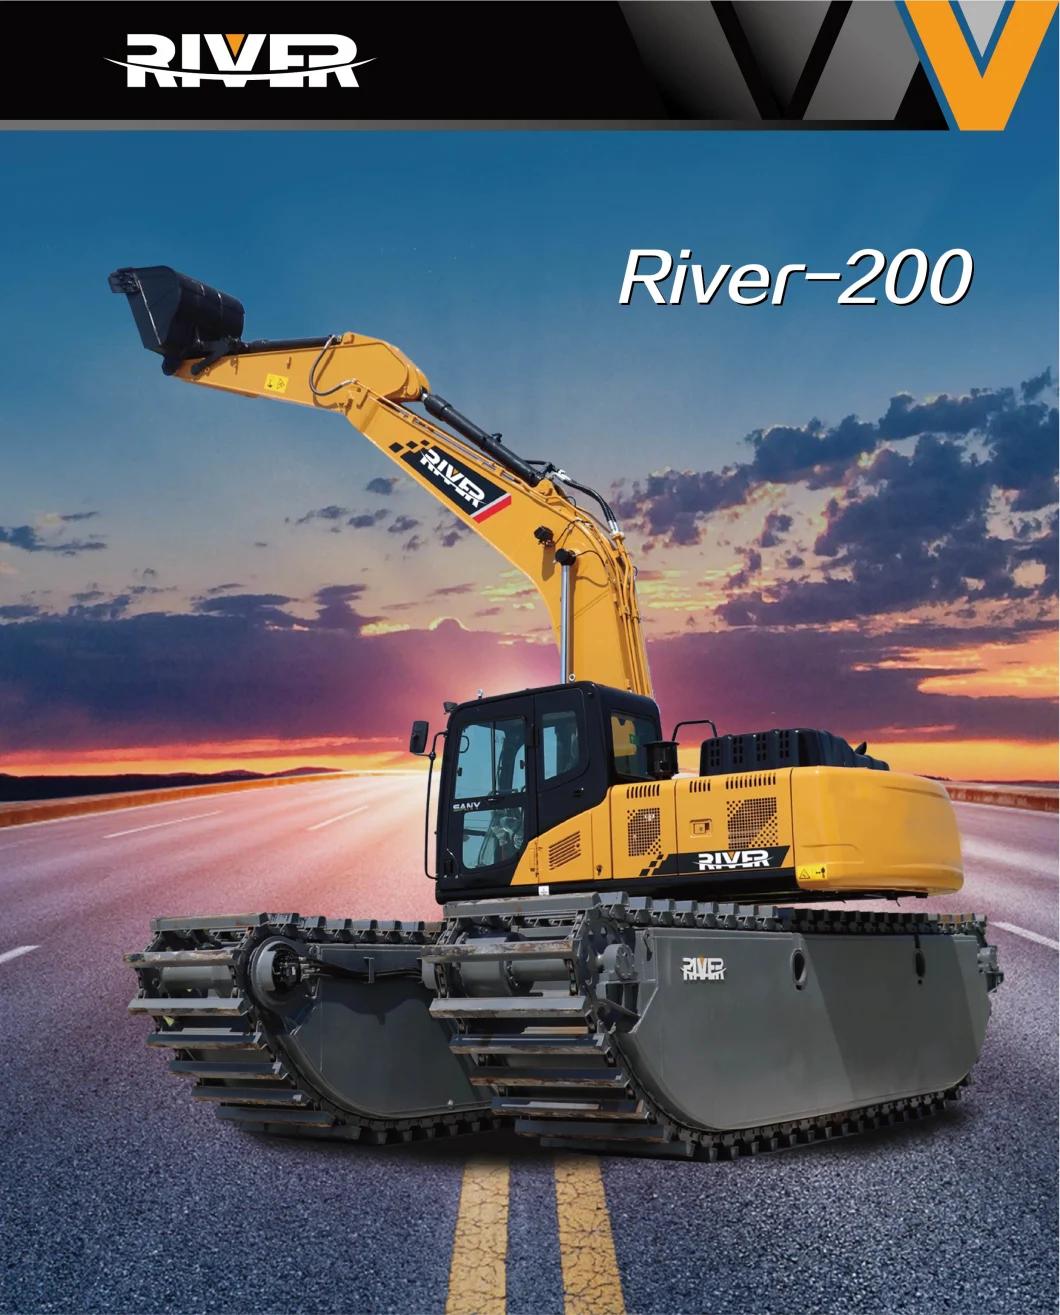 Second Hand Amphibious Excavator Cat 320c Used Swamp Buggy Earth-Moving Machinery with Floating Pontoon Undercarriage